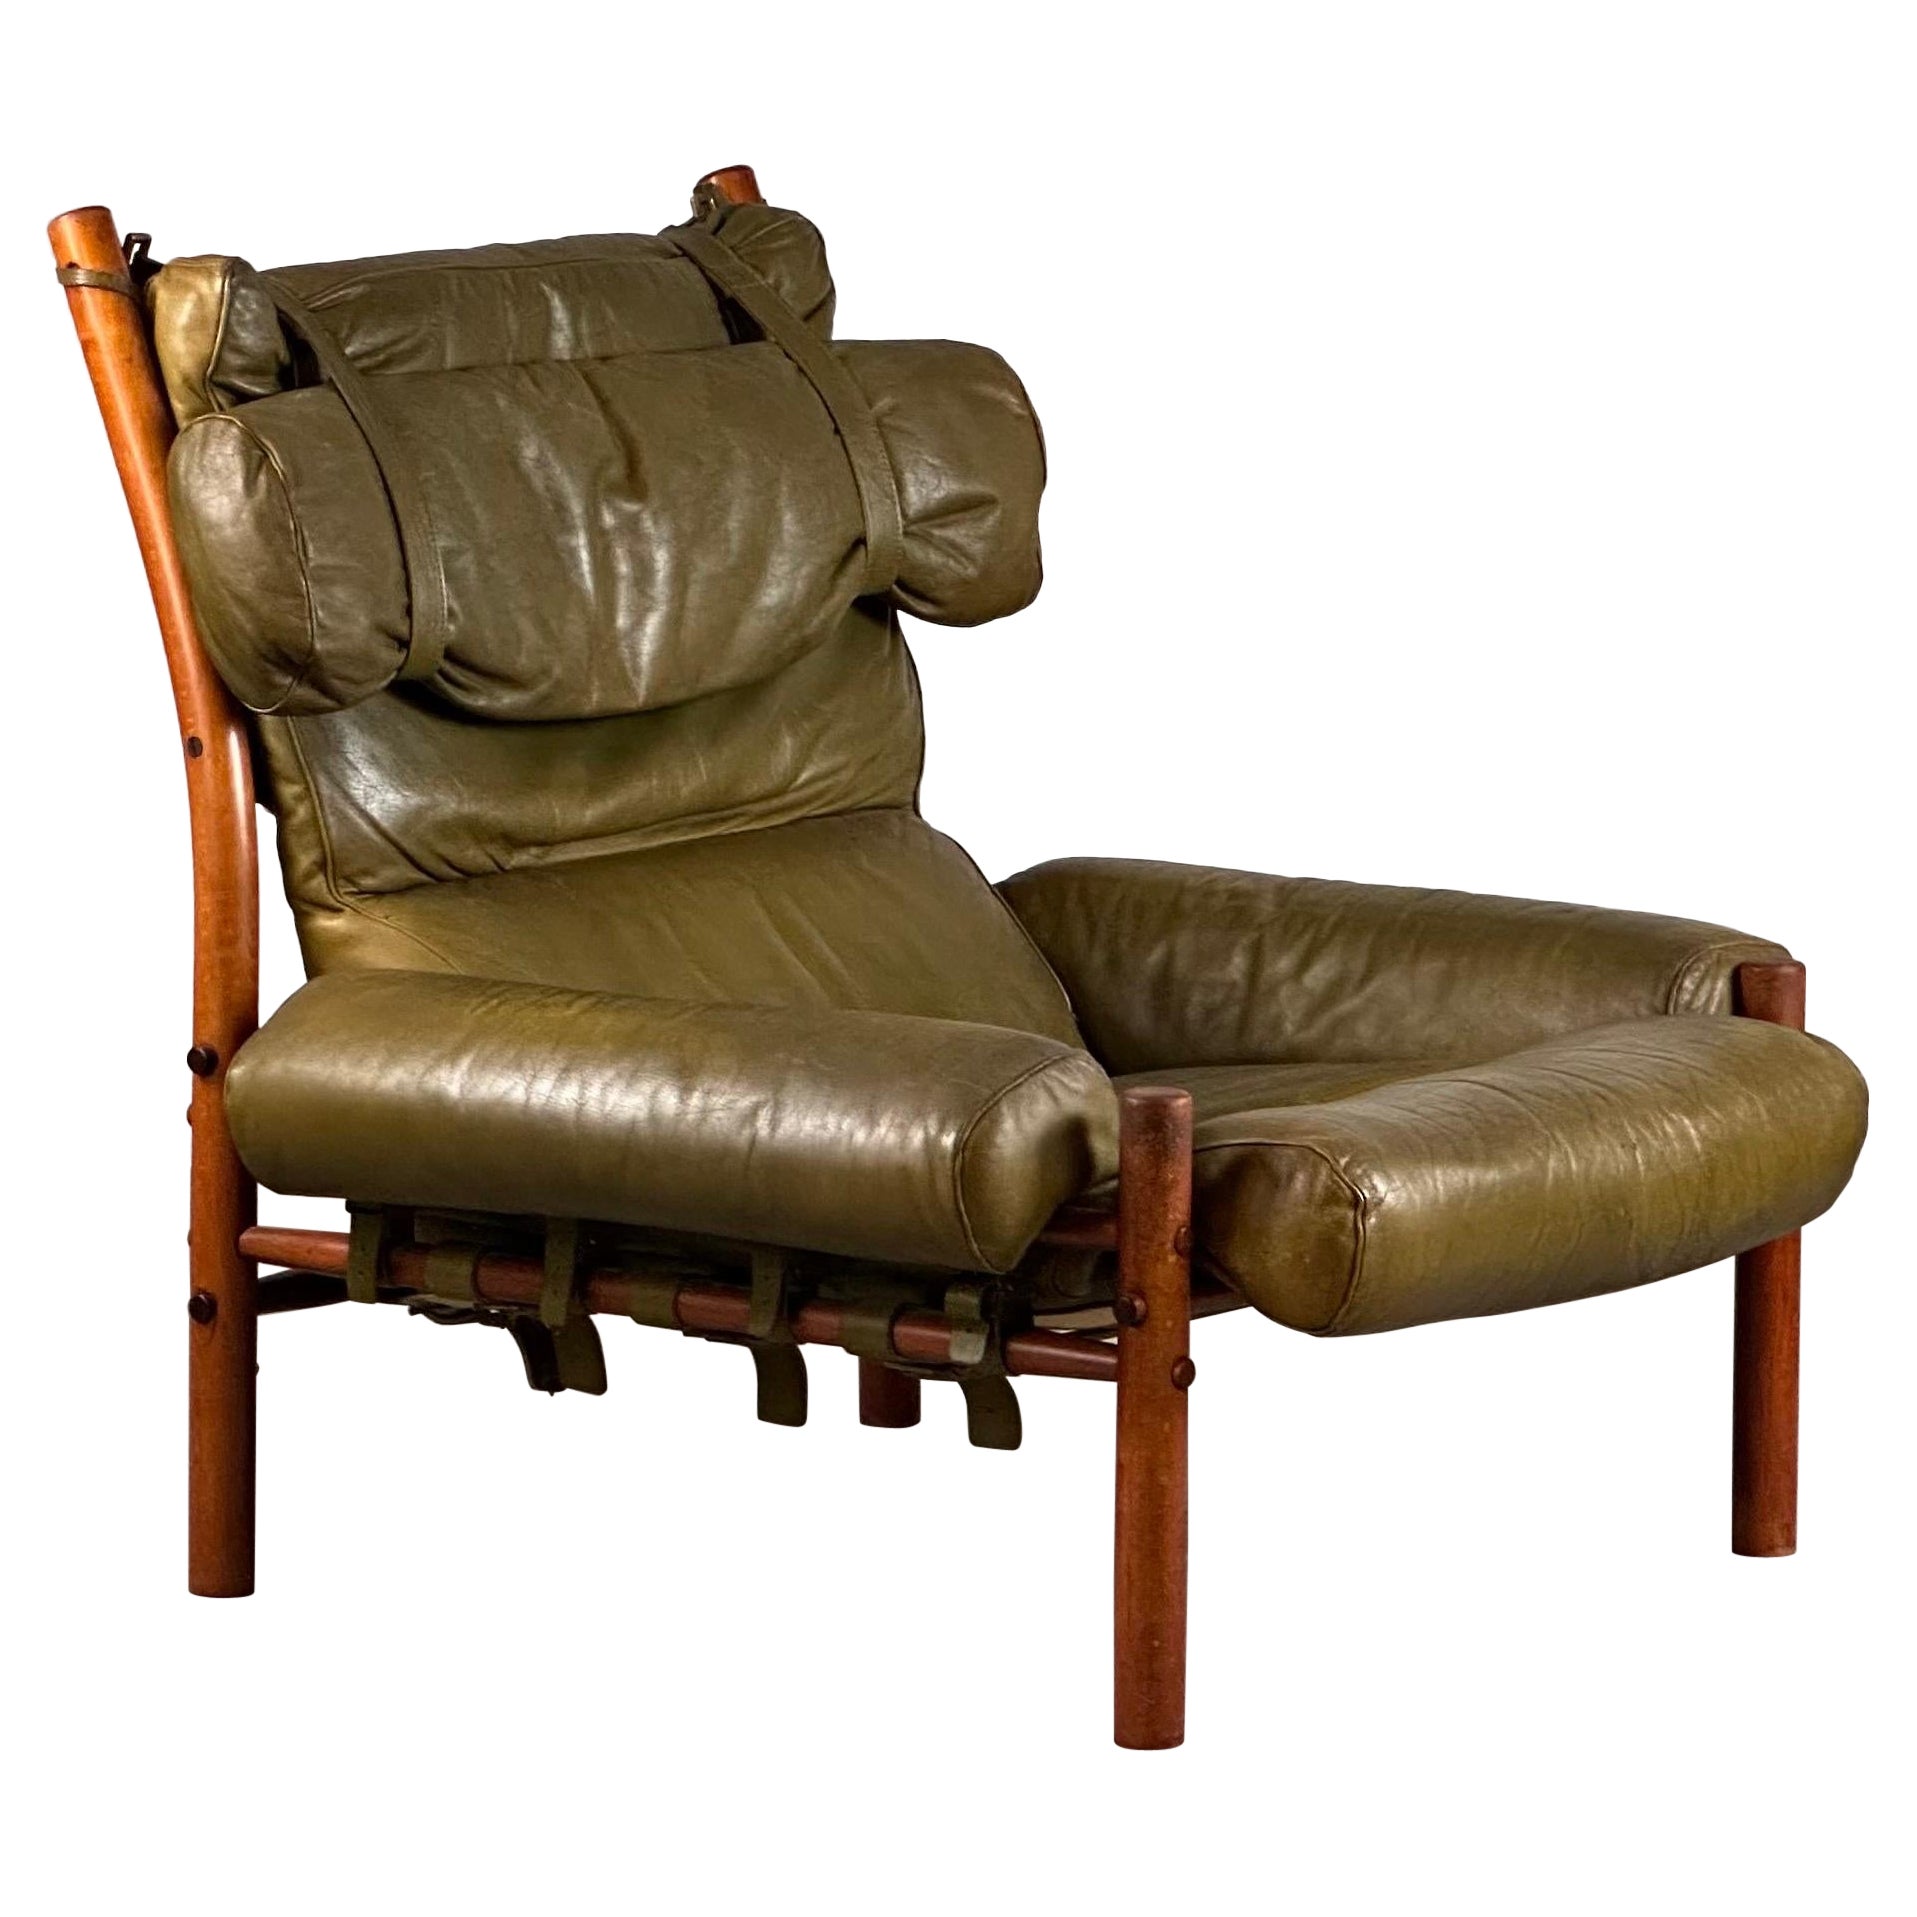 "Inca" Armchair by Arne Norell in Patinated Green Buffalo Leather, 1970s Sweden For Sale